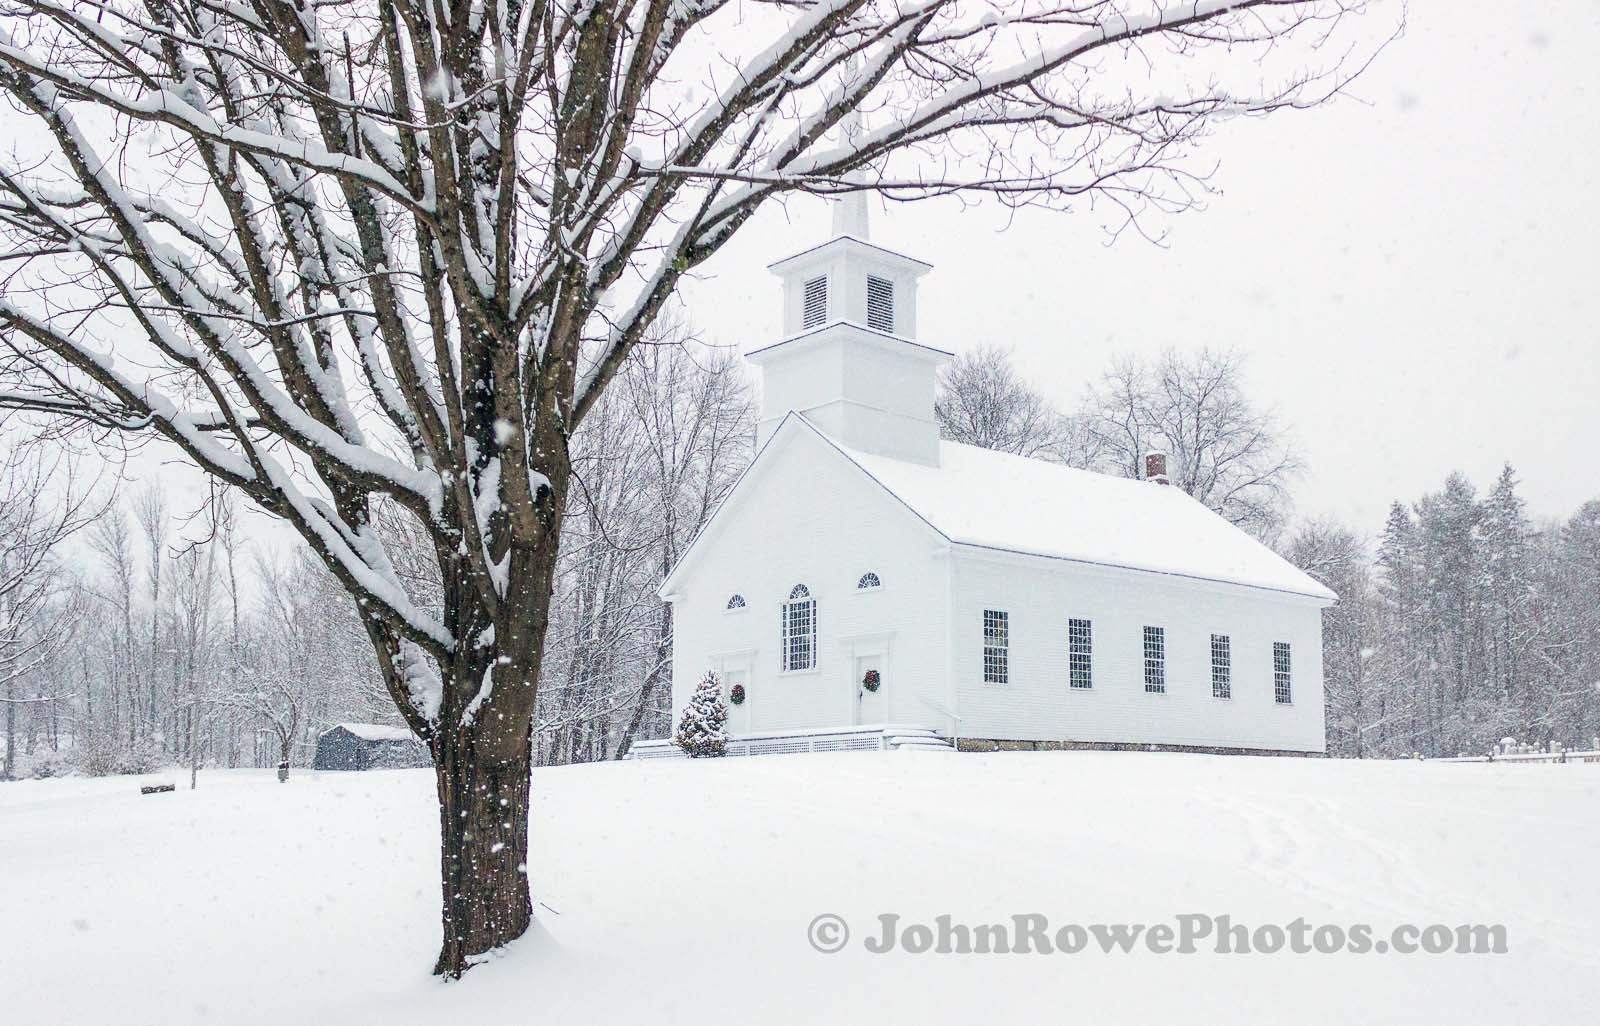 Union Meeting House in Burke Hollow, VT  December 2019